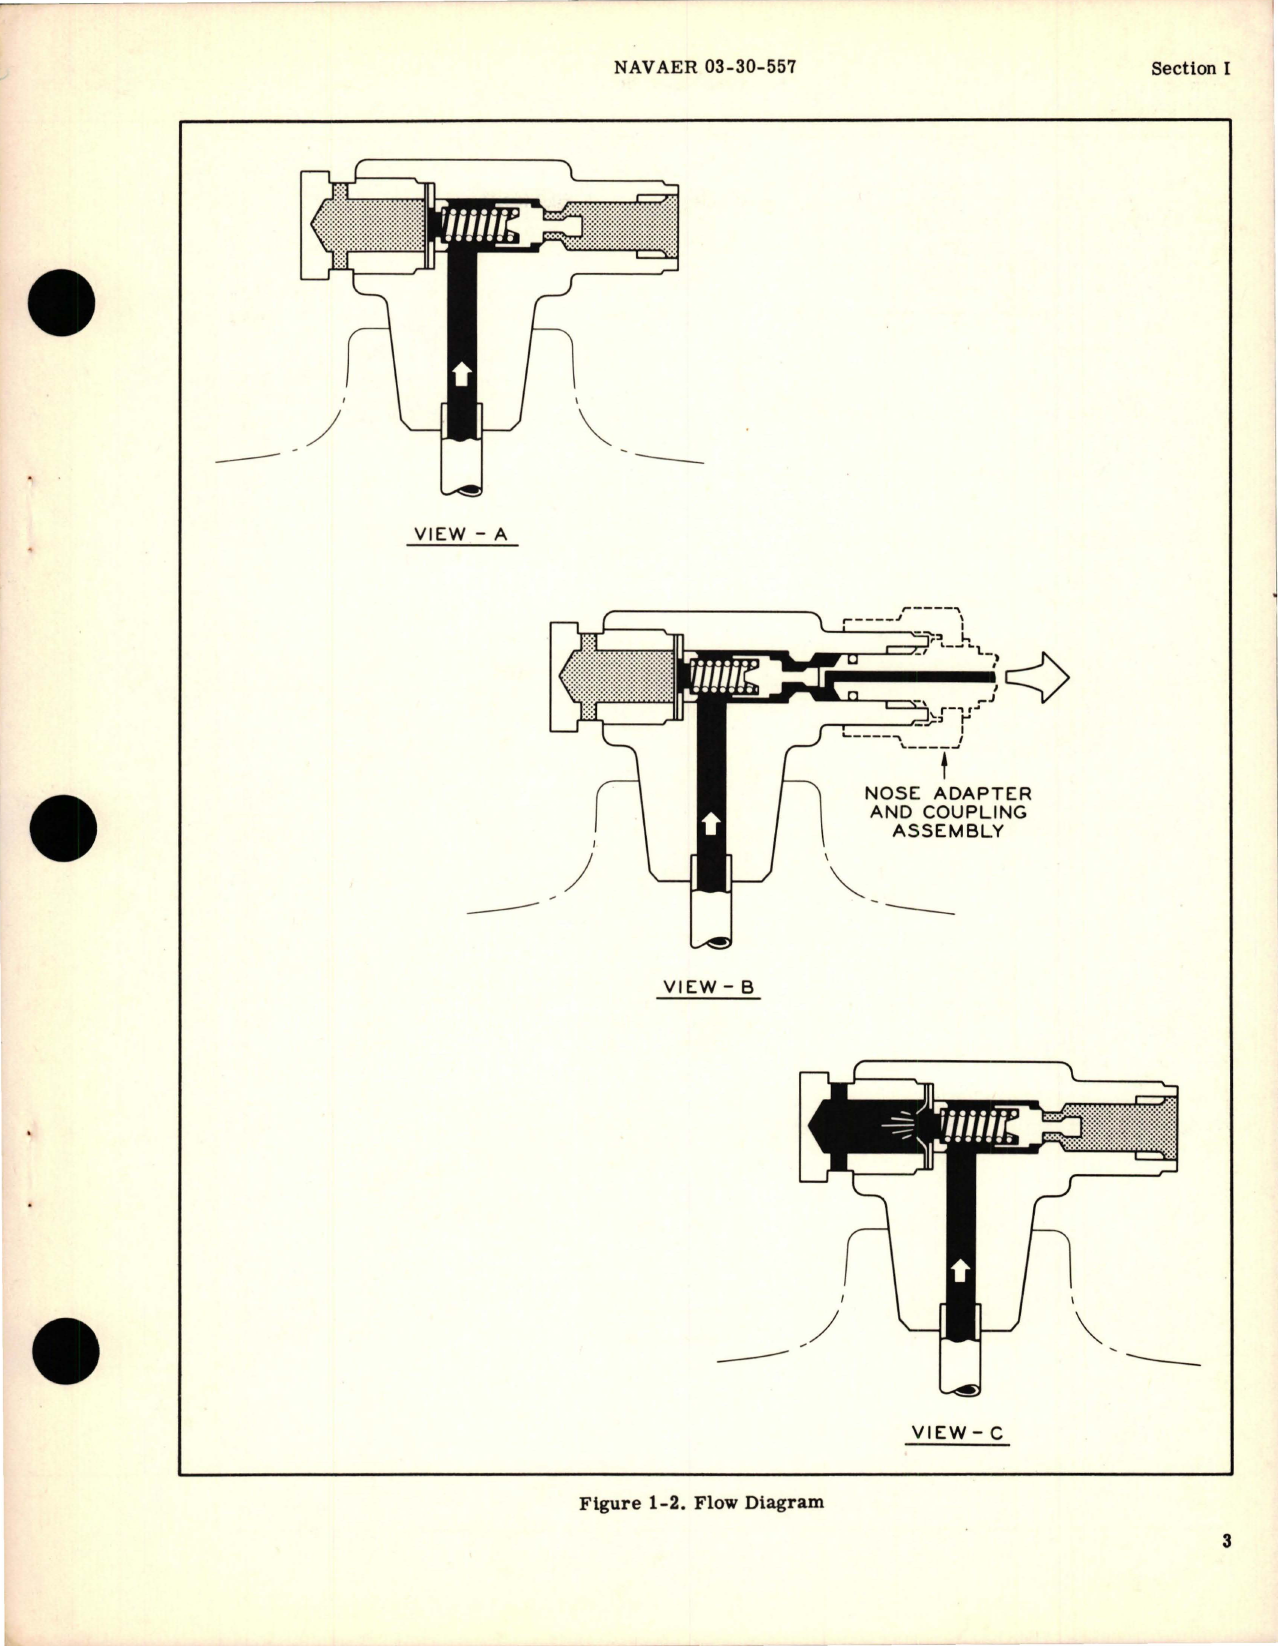 Sample page 5 from AirCorps Library document: Operation, Service and Overhaul Instructions with Parts Catalog for Self Opening High Pressure Valves